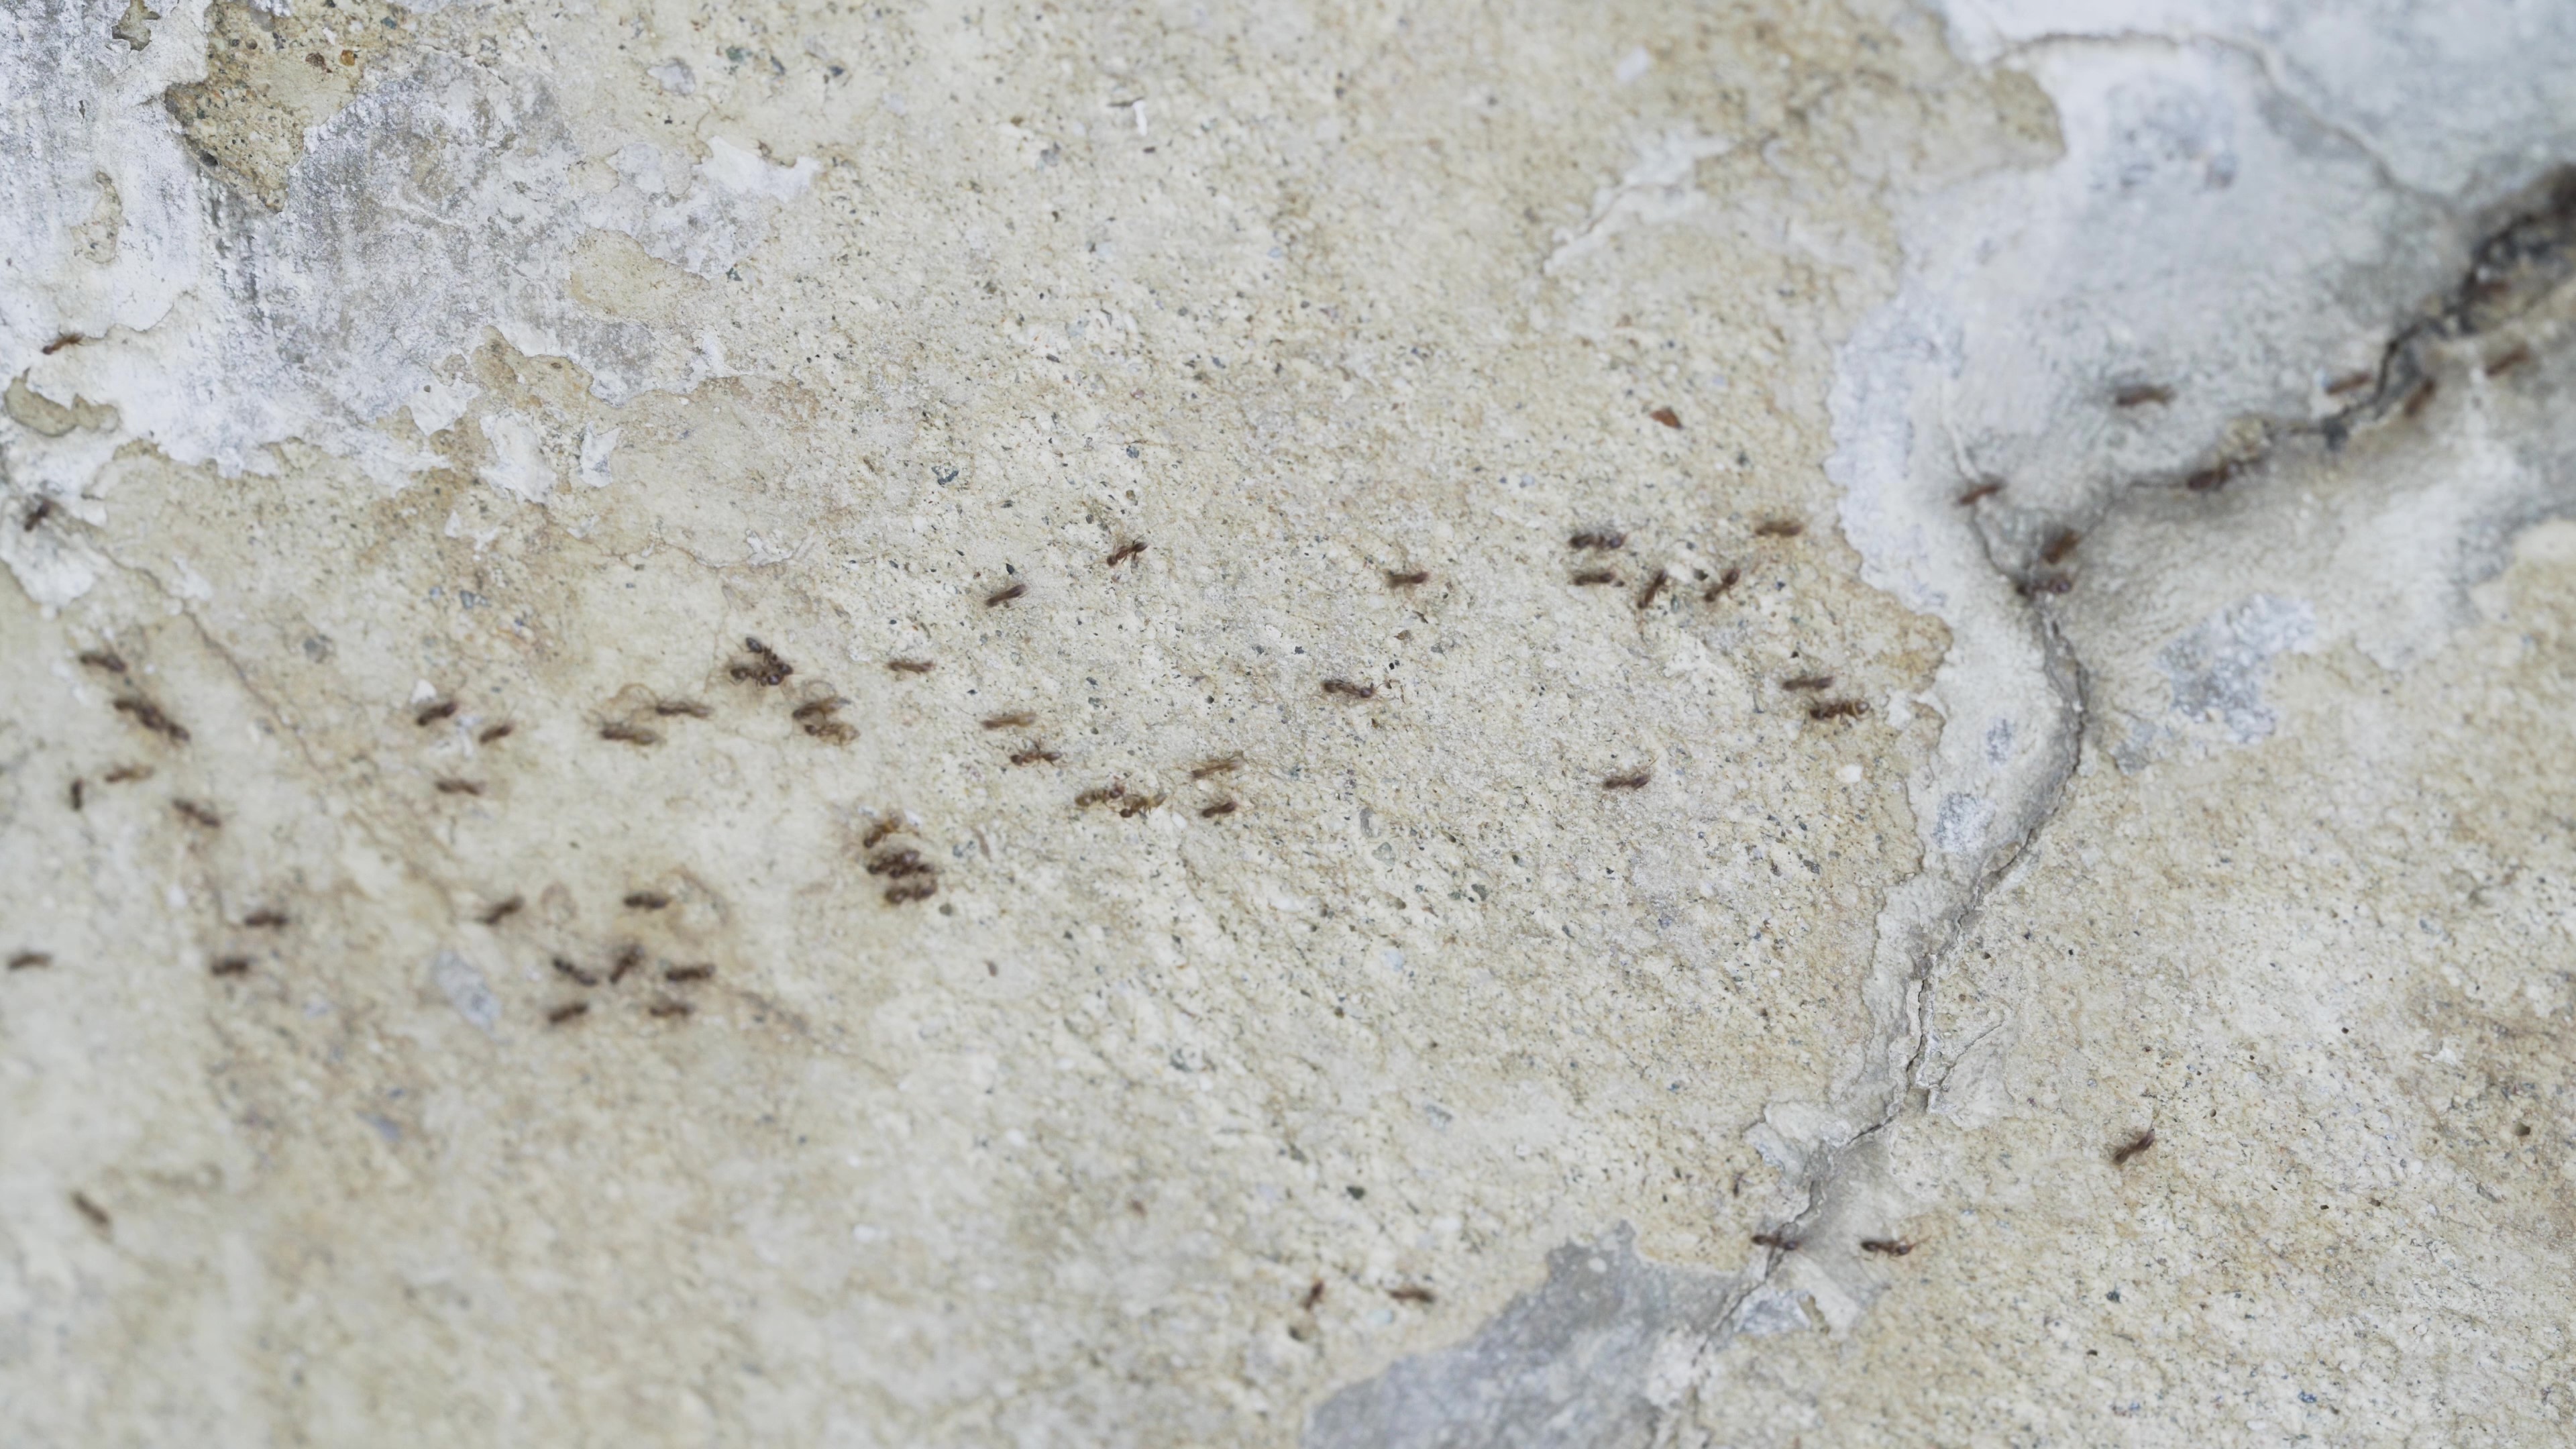 Argentine ants forming a trail on concrete.